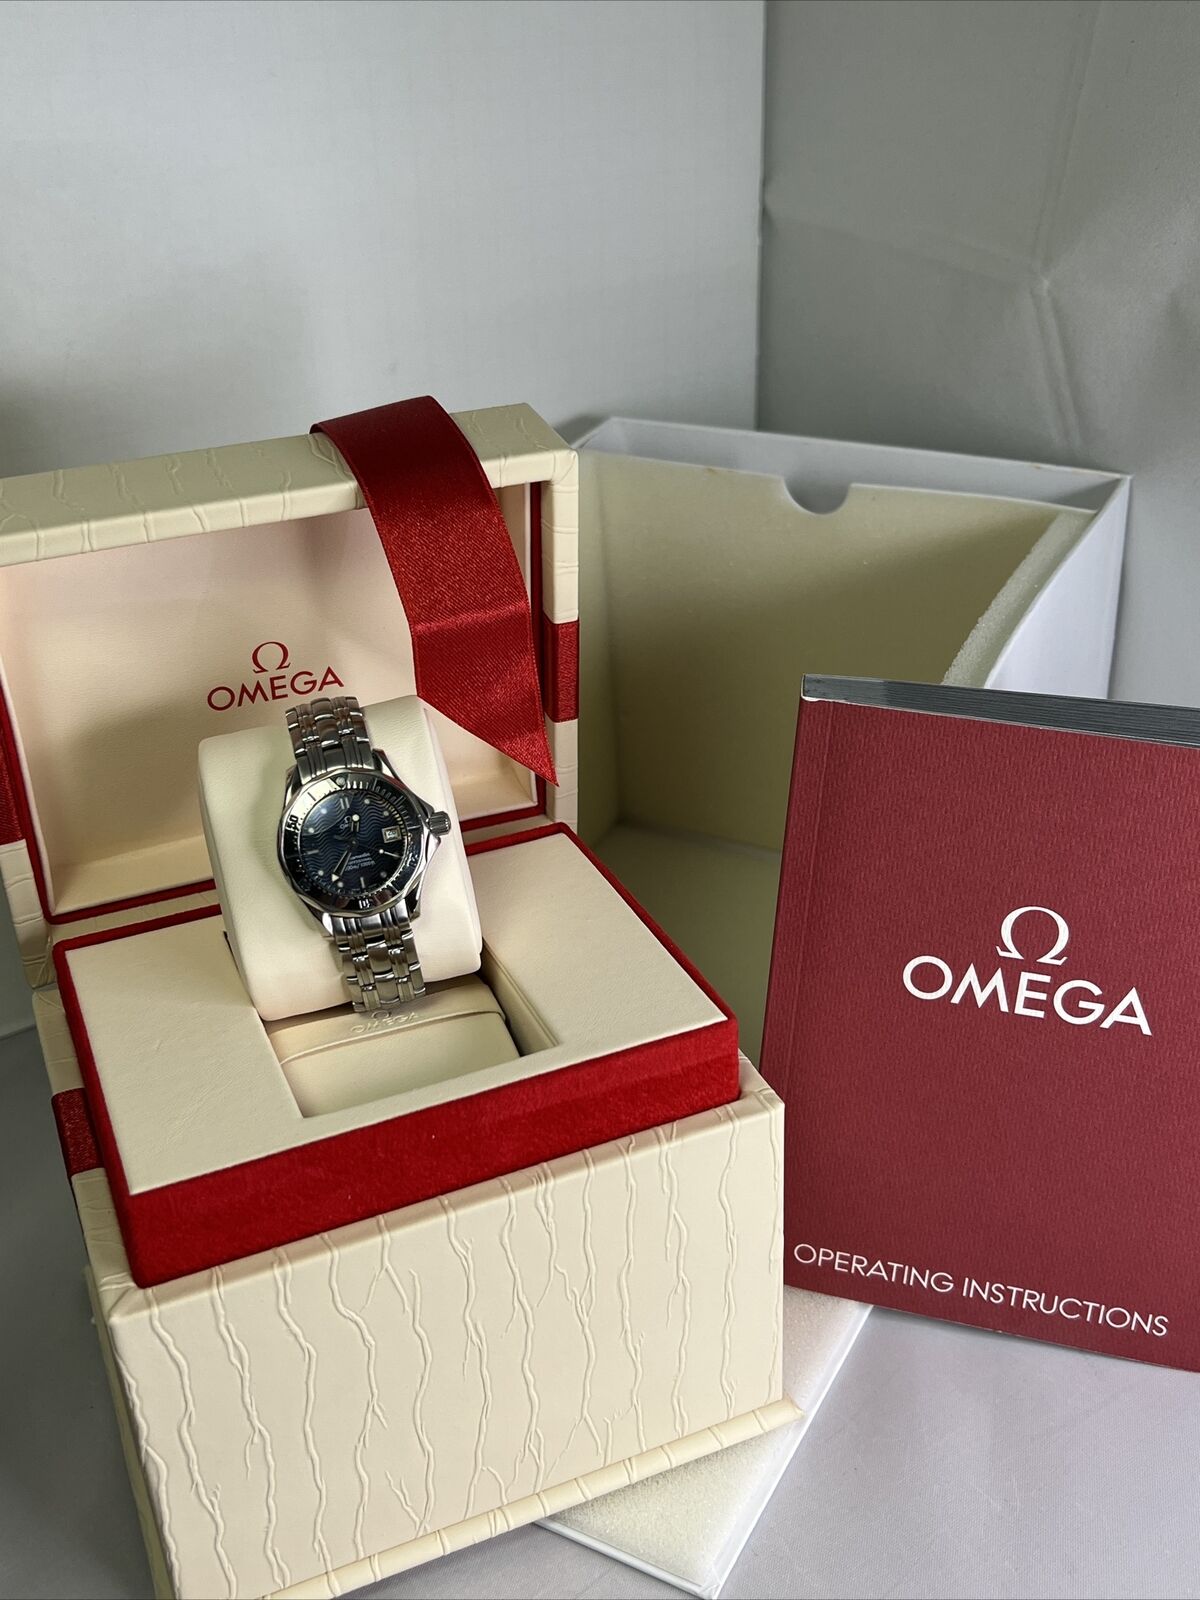 OMEGA SEAMASTER PRO 28MM S/S BLUE WAVE DIAL DATE QUARTZ CAL. 1424 WATCH